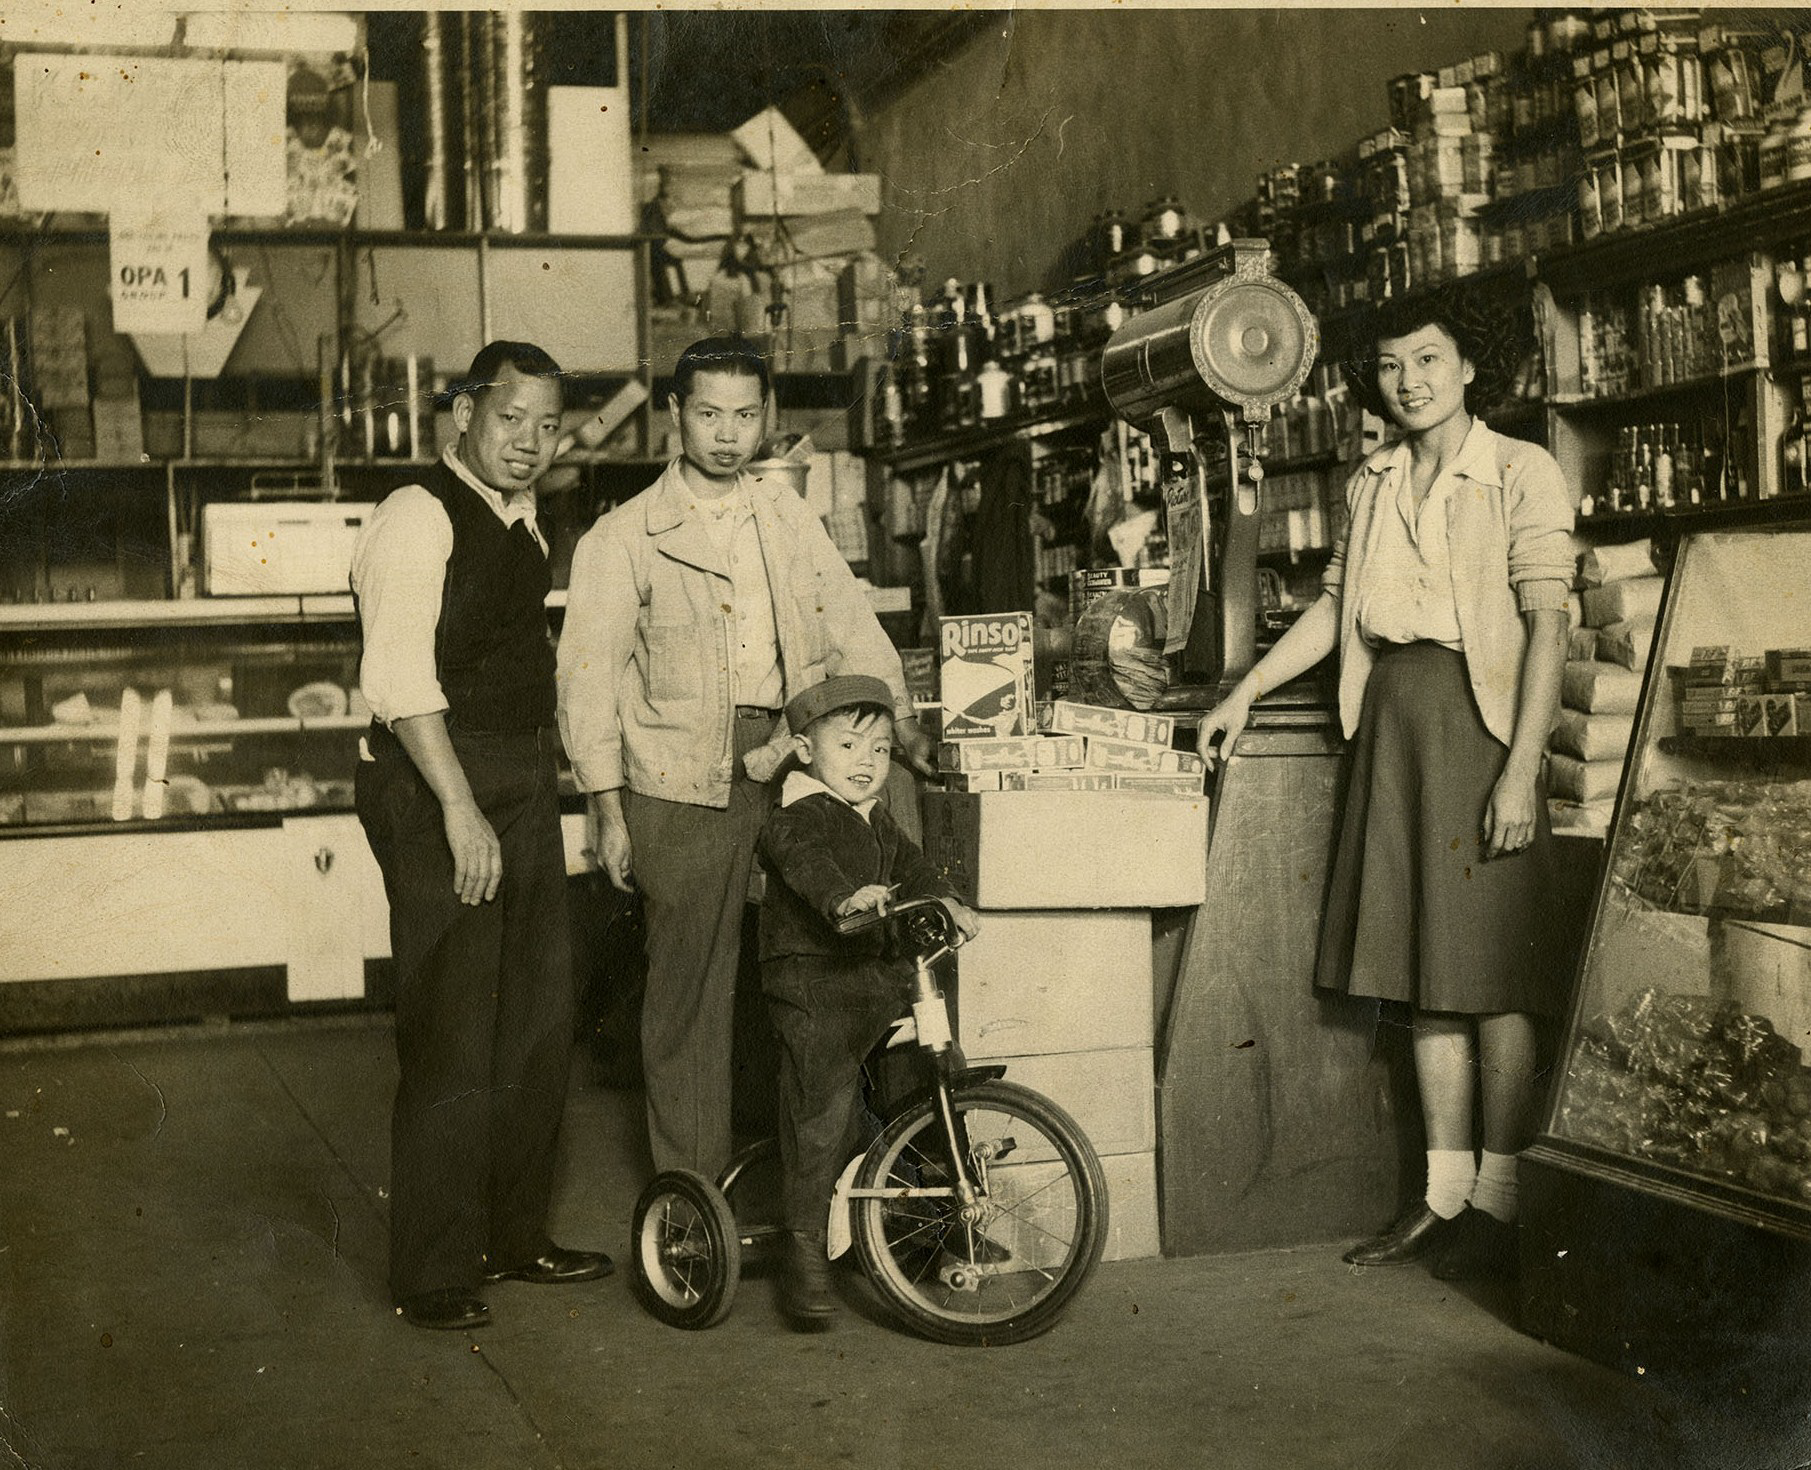 Two men, one little boy with a bike, and a young woman stand in front of a counter.